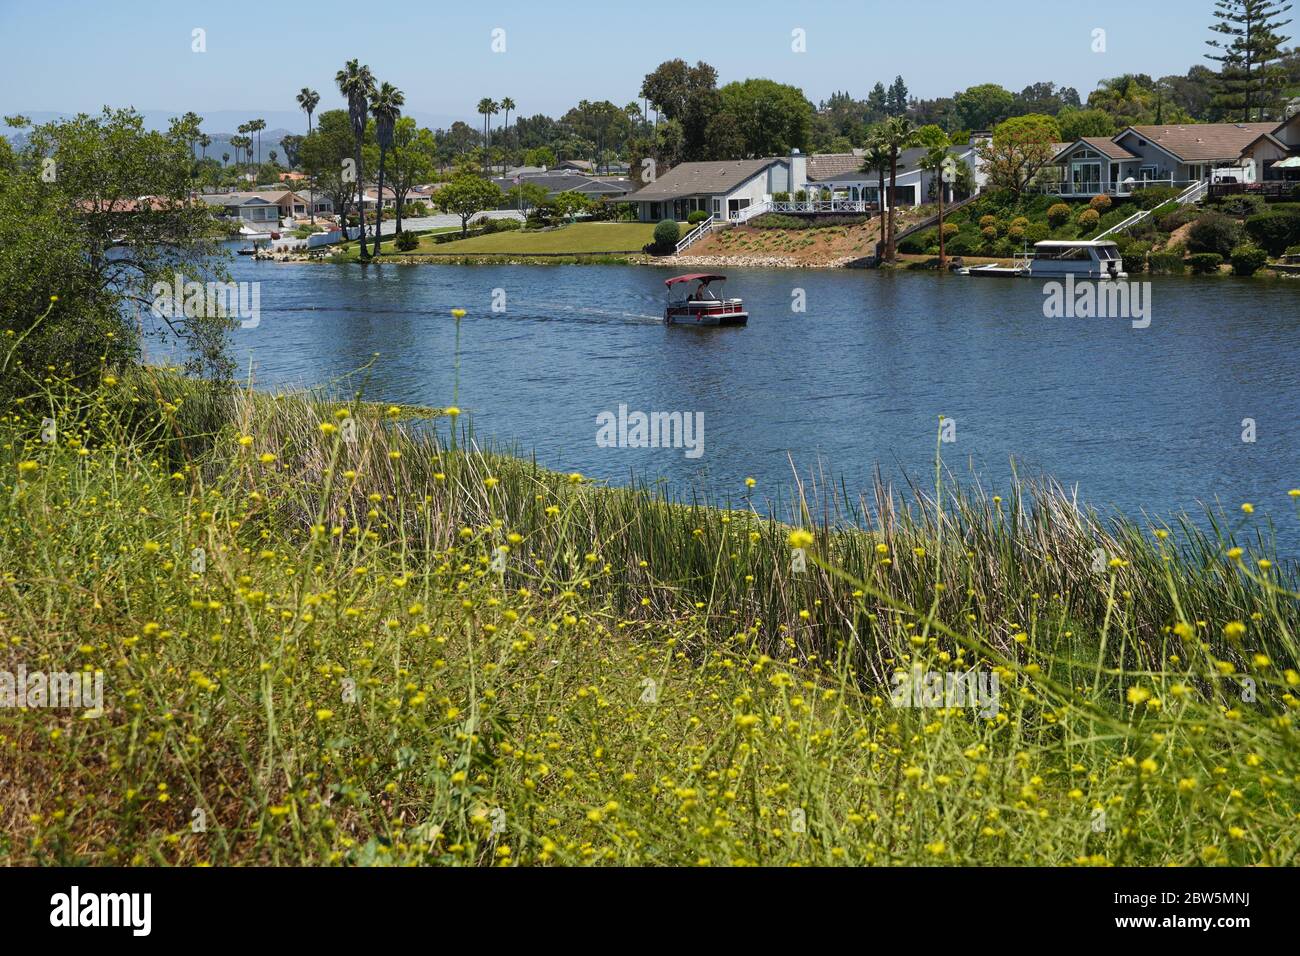 Pontoon boat making its way down Lake San Marcos past residences on a sunny afternoon, as viewed from a shoreline filled with yellow wild flowers. Stock Photo